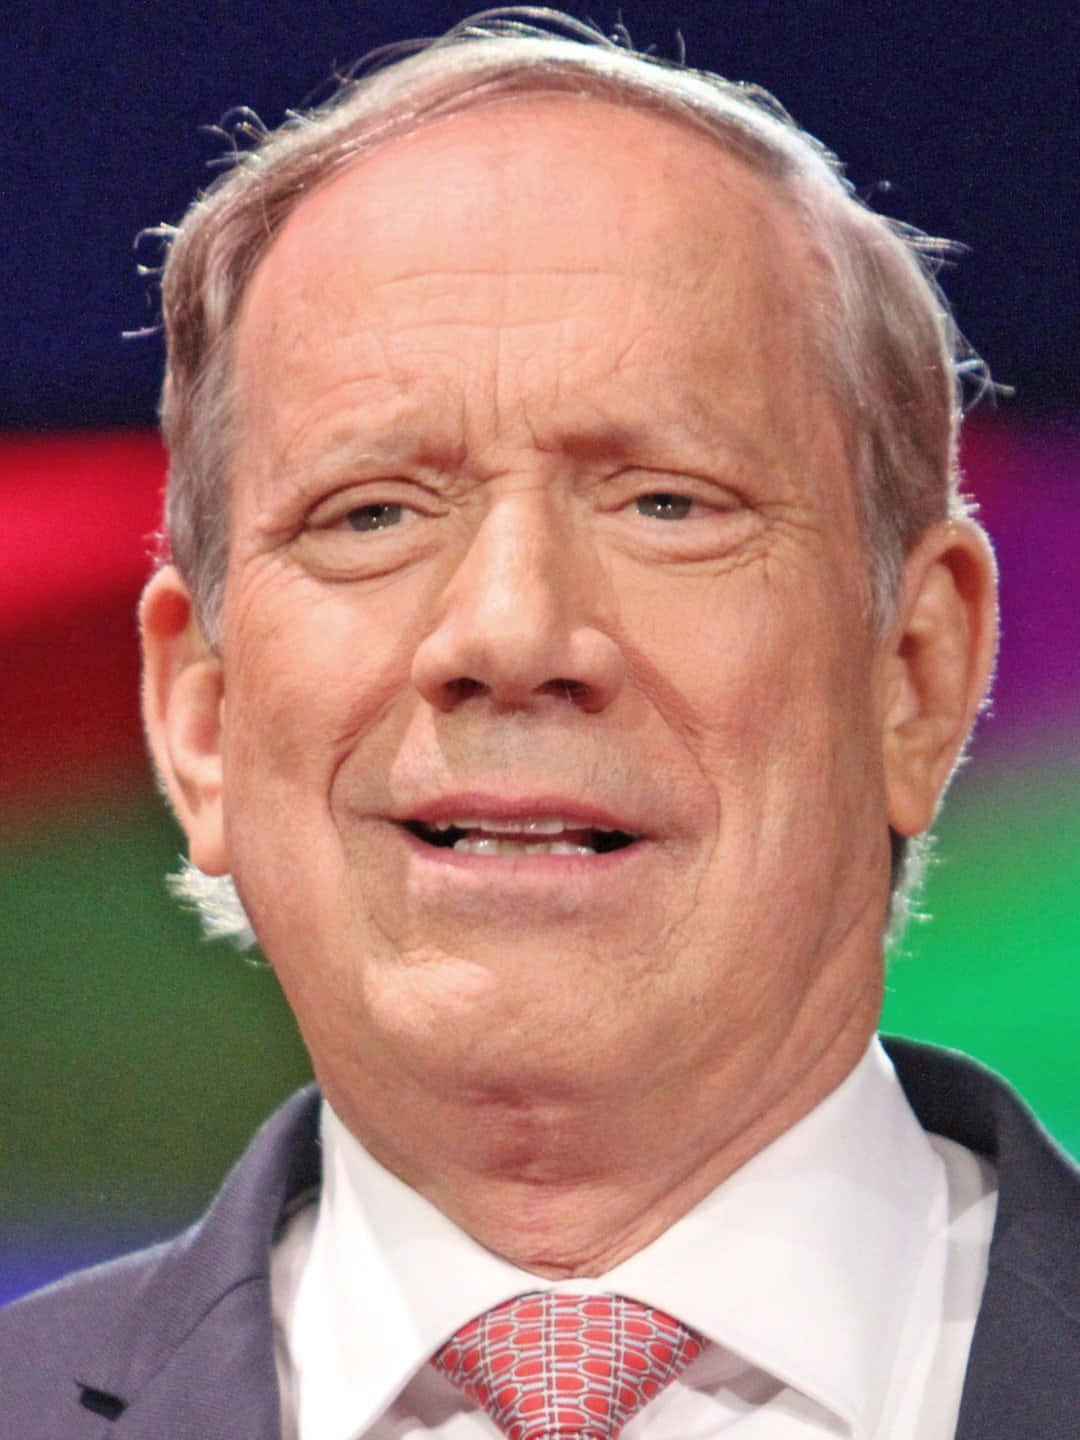 George Pataki And His Adorable Smile Wallpaper